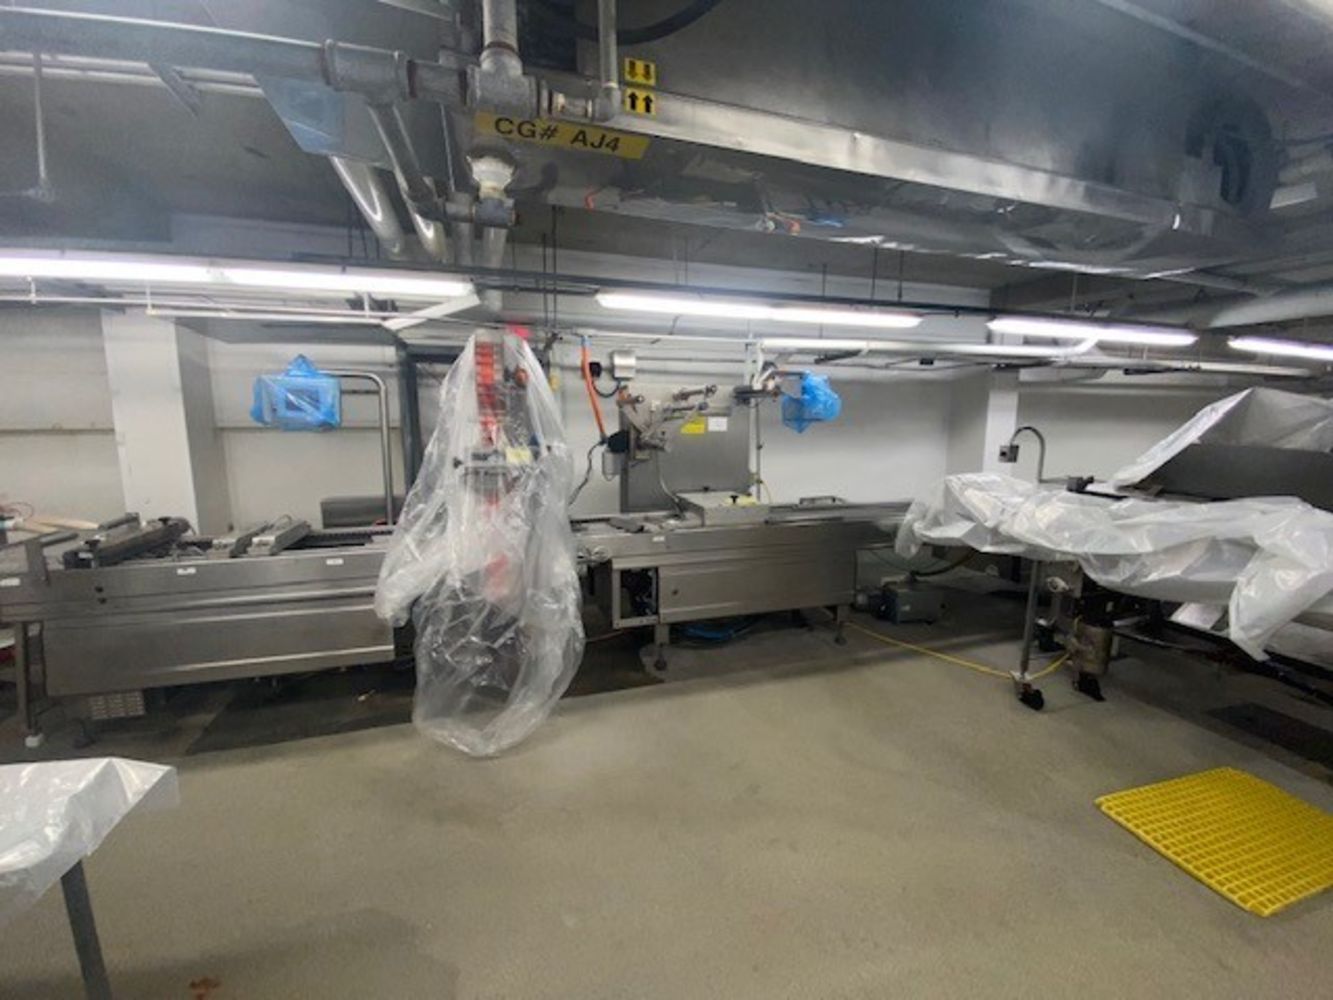 Multi-Location Pasta, Packaging and Processing Equipment Consignment Auction - Contact M Davis Group to Sell YOUR Surplus